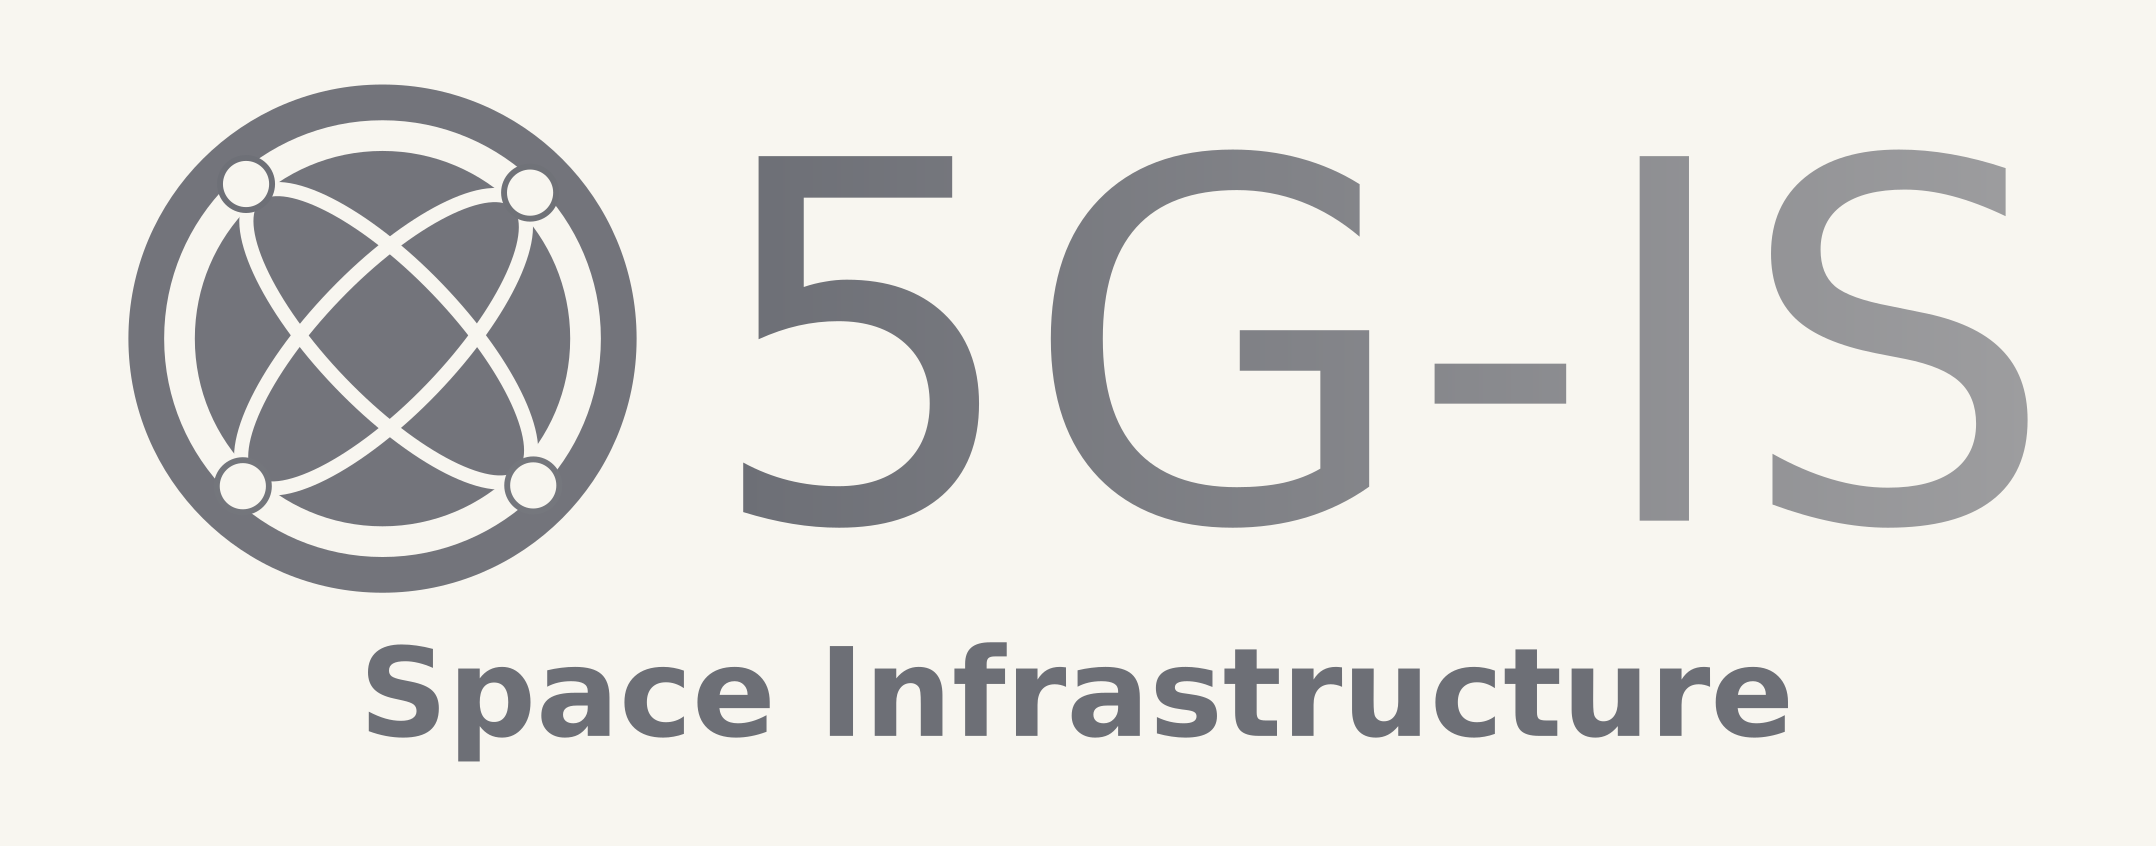 5g_is_logo.png